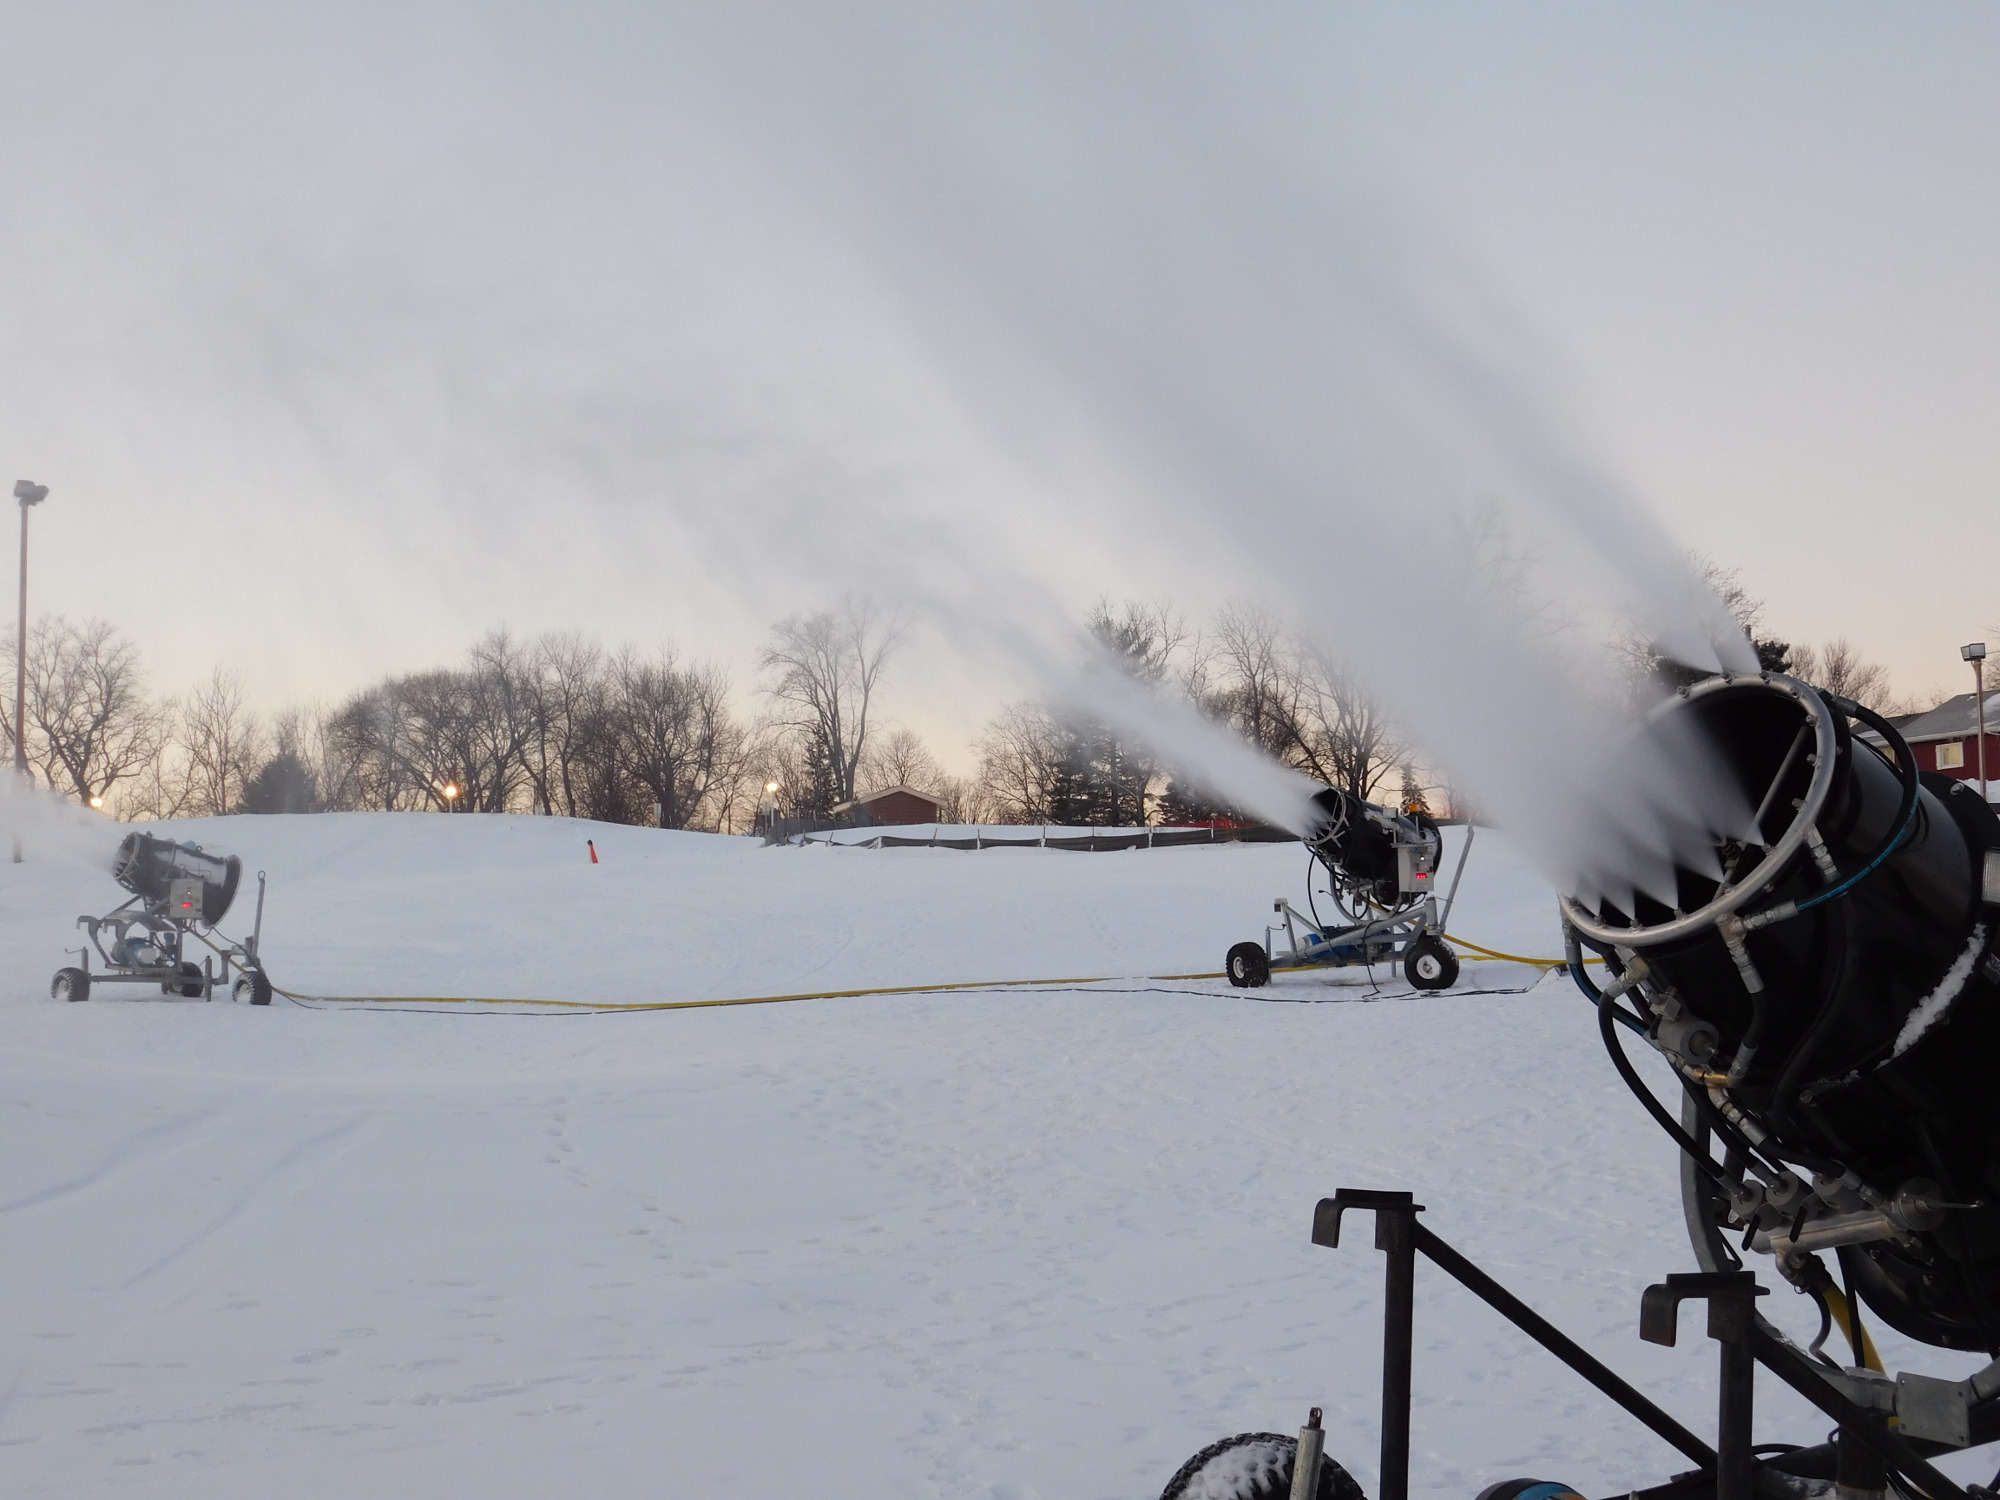 Make Real Snow. Snow Makers and Snow Making Equipment